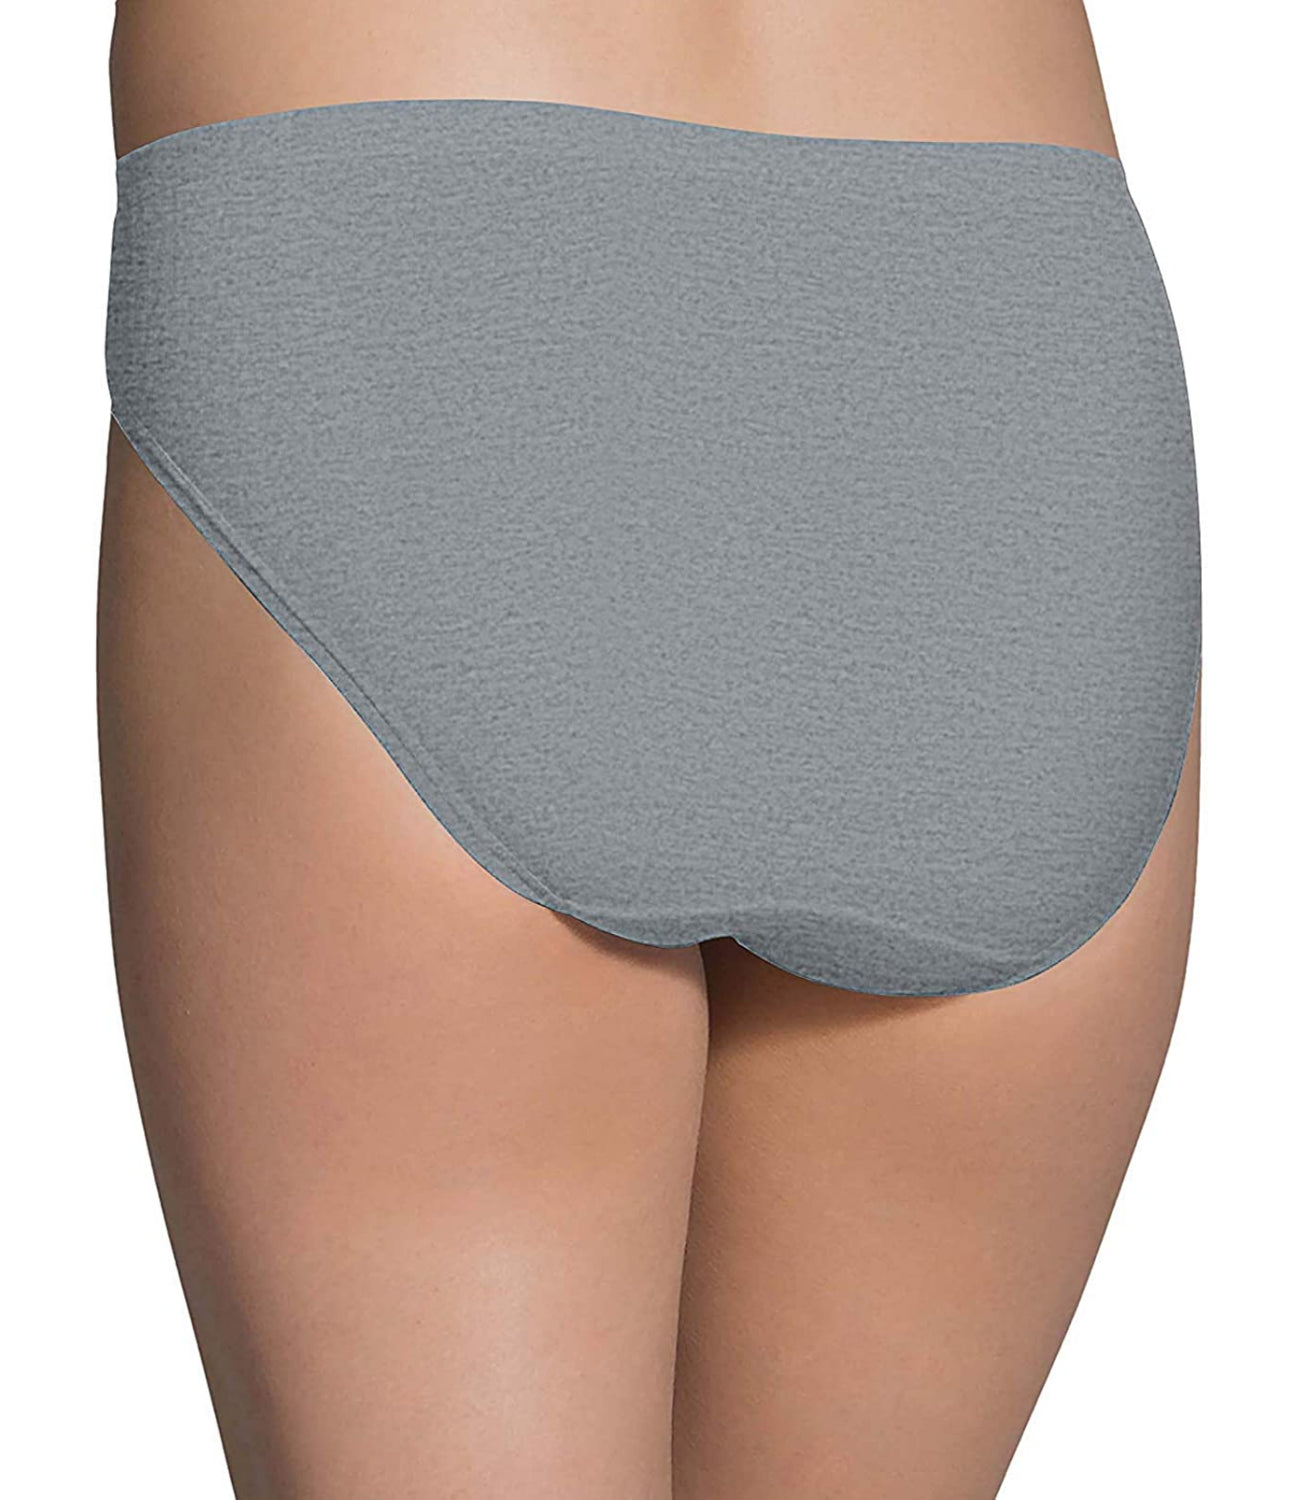 Fruit of the Loom Women's Beyondsoft Brief, 6 Pack, Assorted